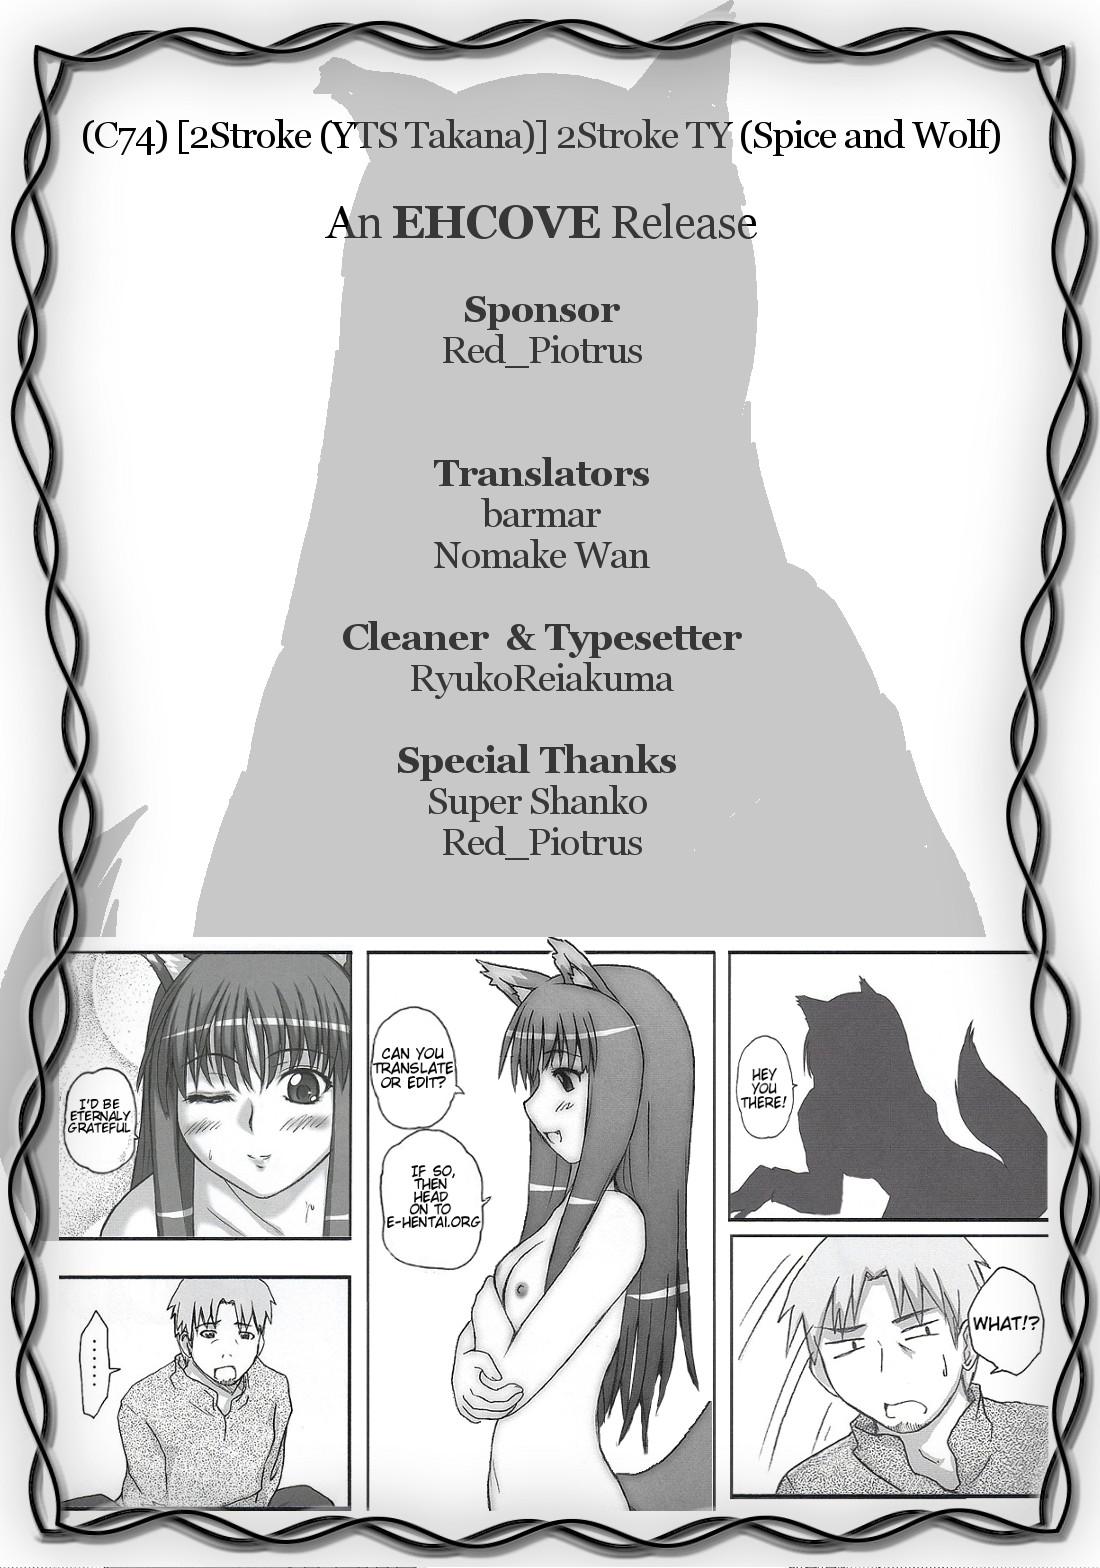 Gay Public 2Stroke TY - Spice and wolf Plumper - Page 27